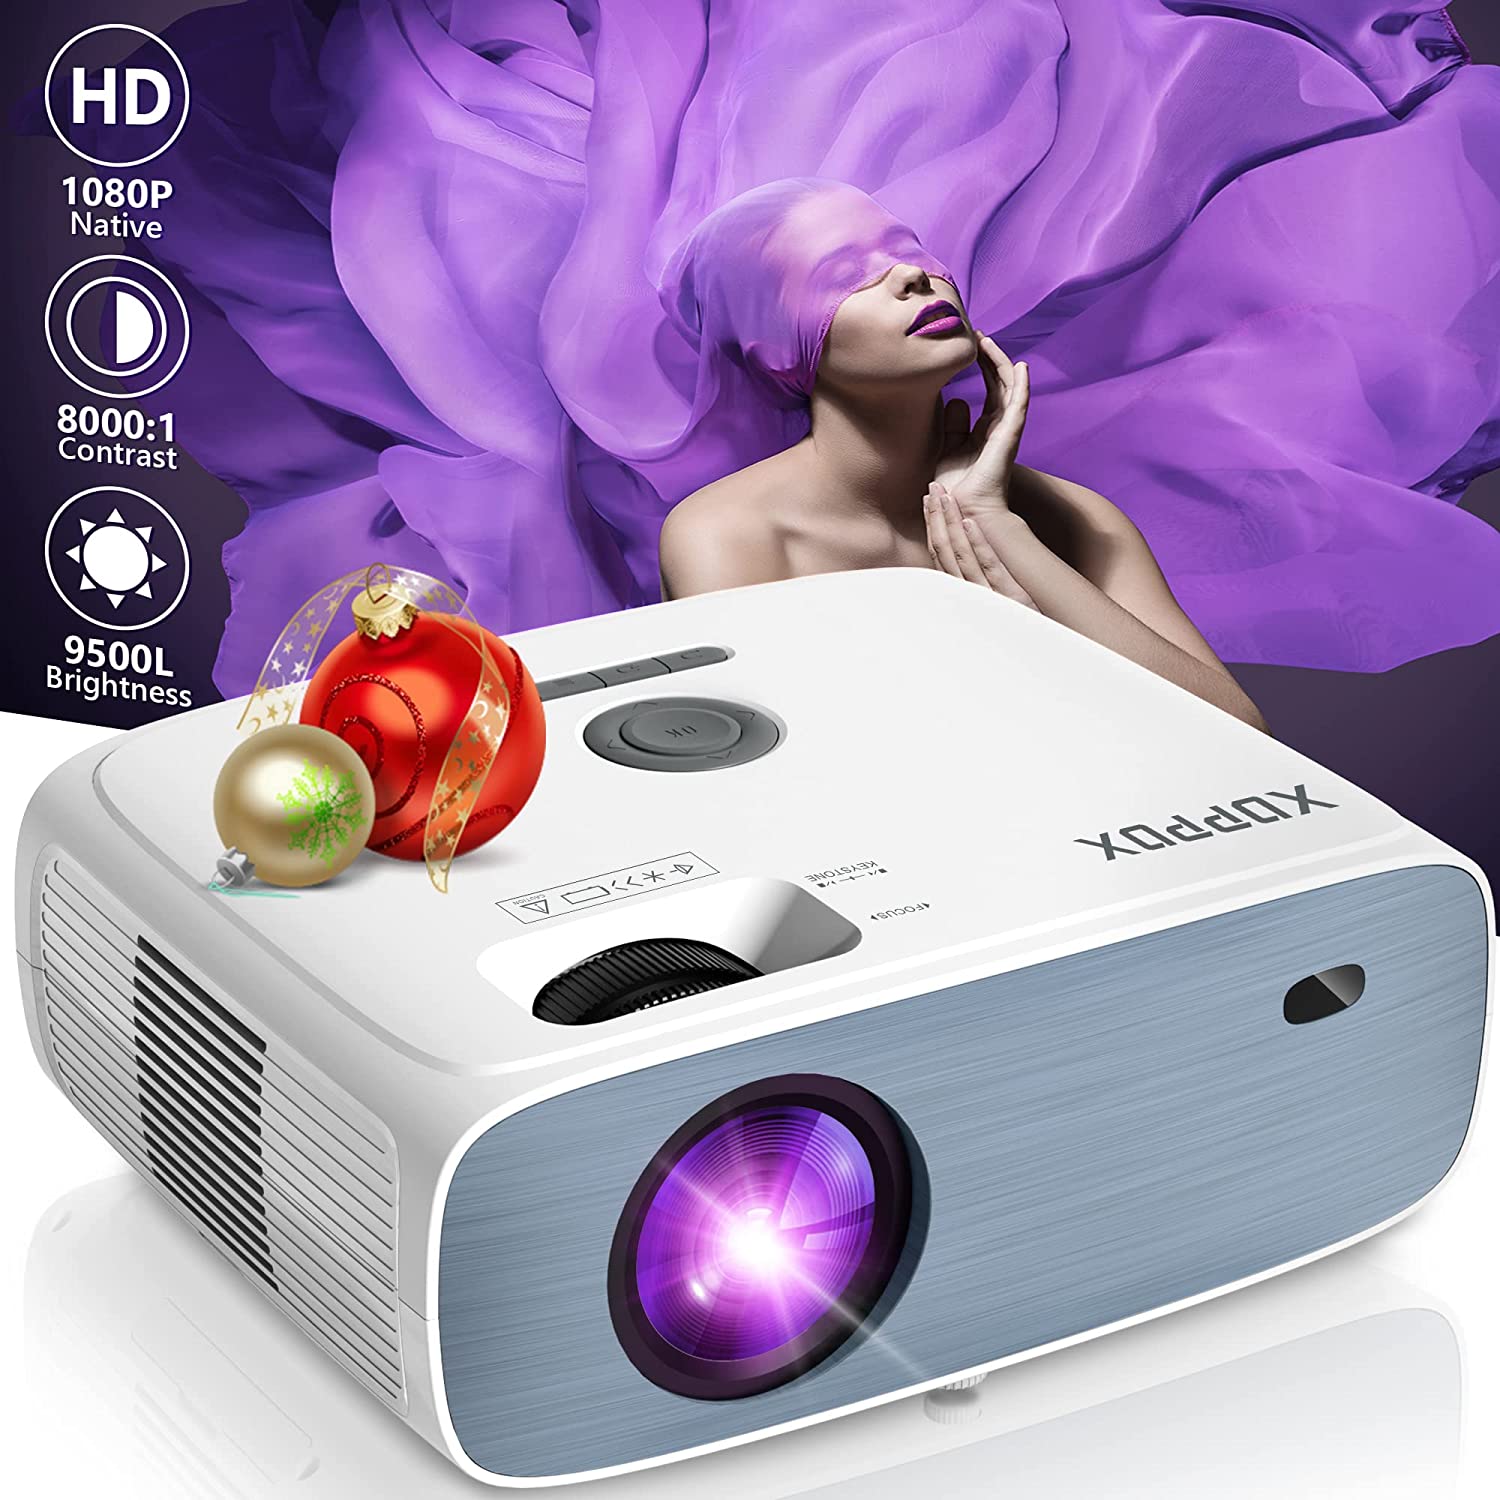 Best Native 1080p Projector